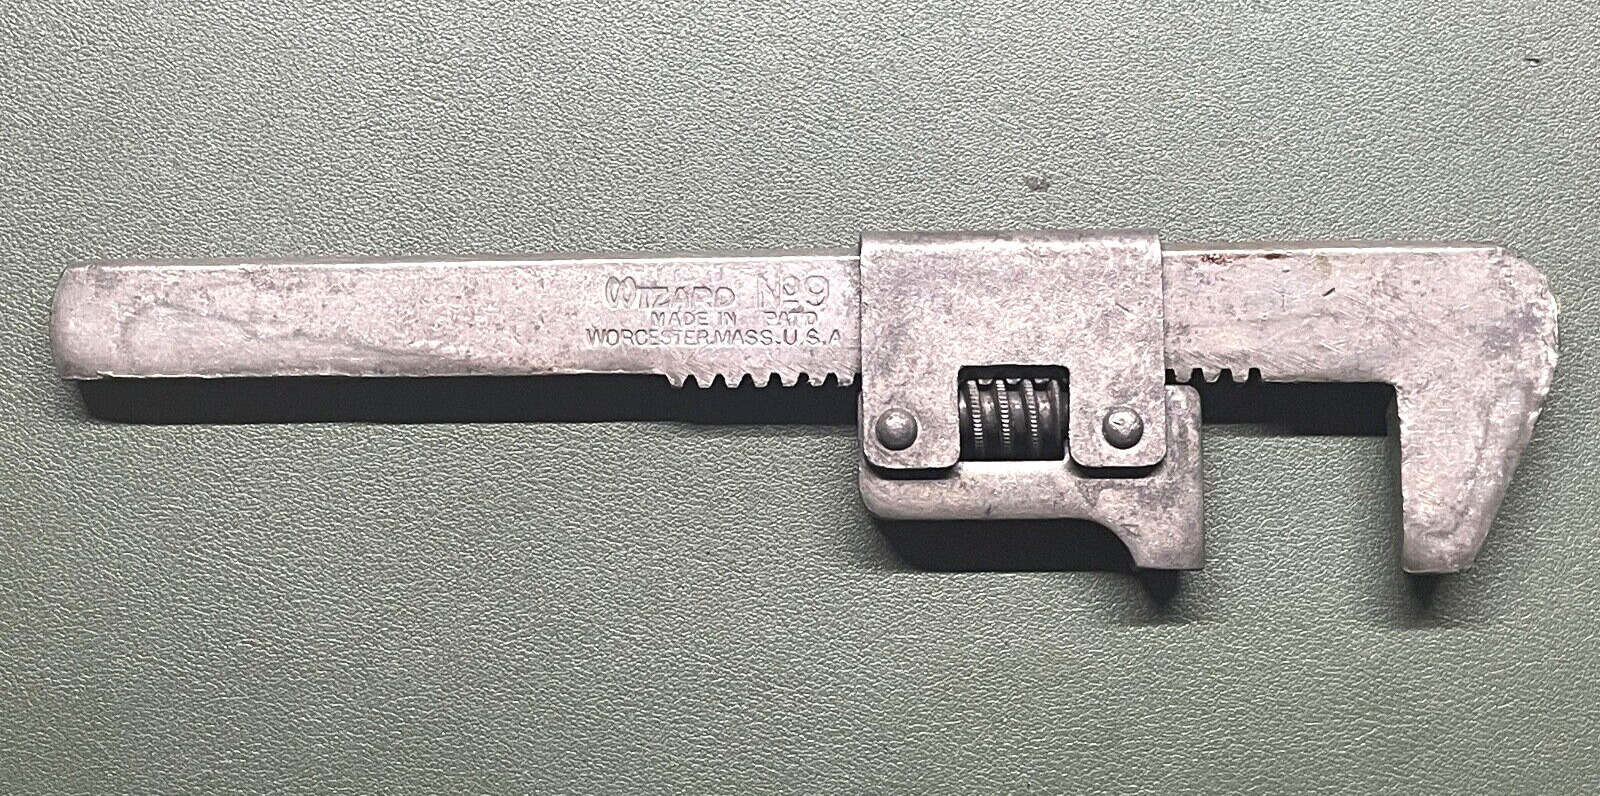 Vintage Wizard No.9 Adjustable Monkey Wrench- RUST FREE-Made in Worcester, Mass.